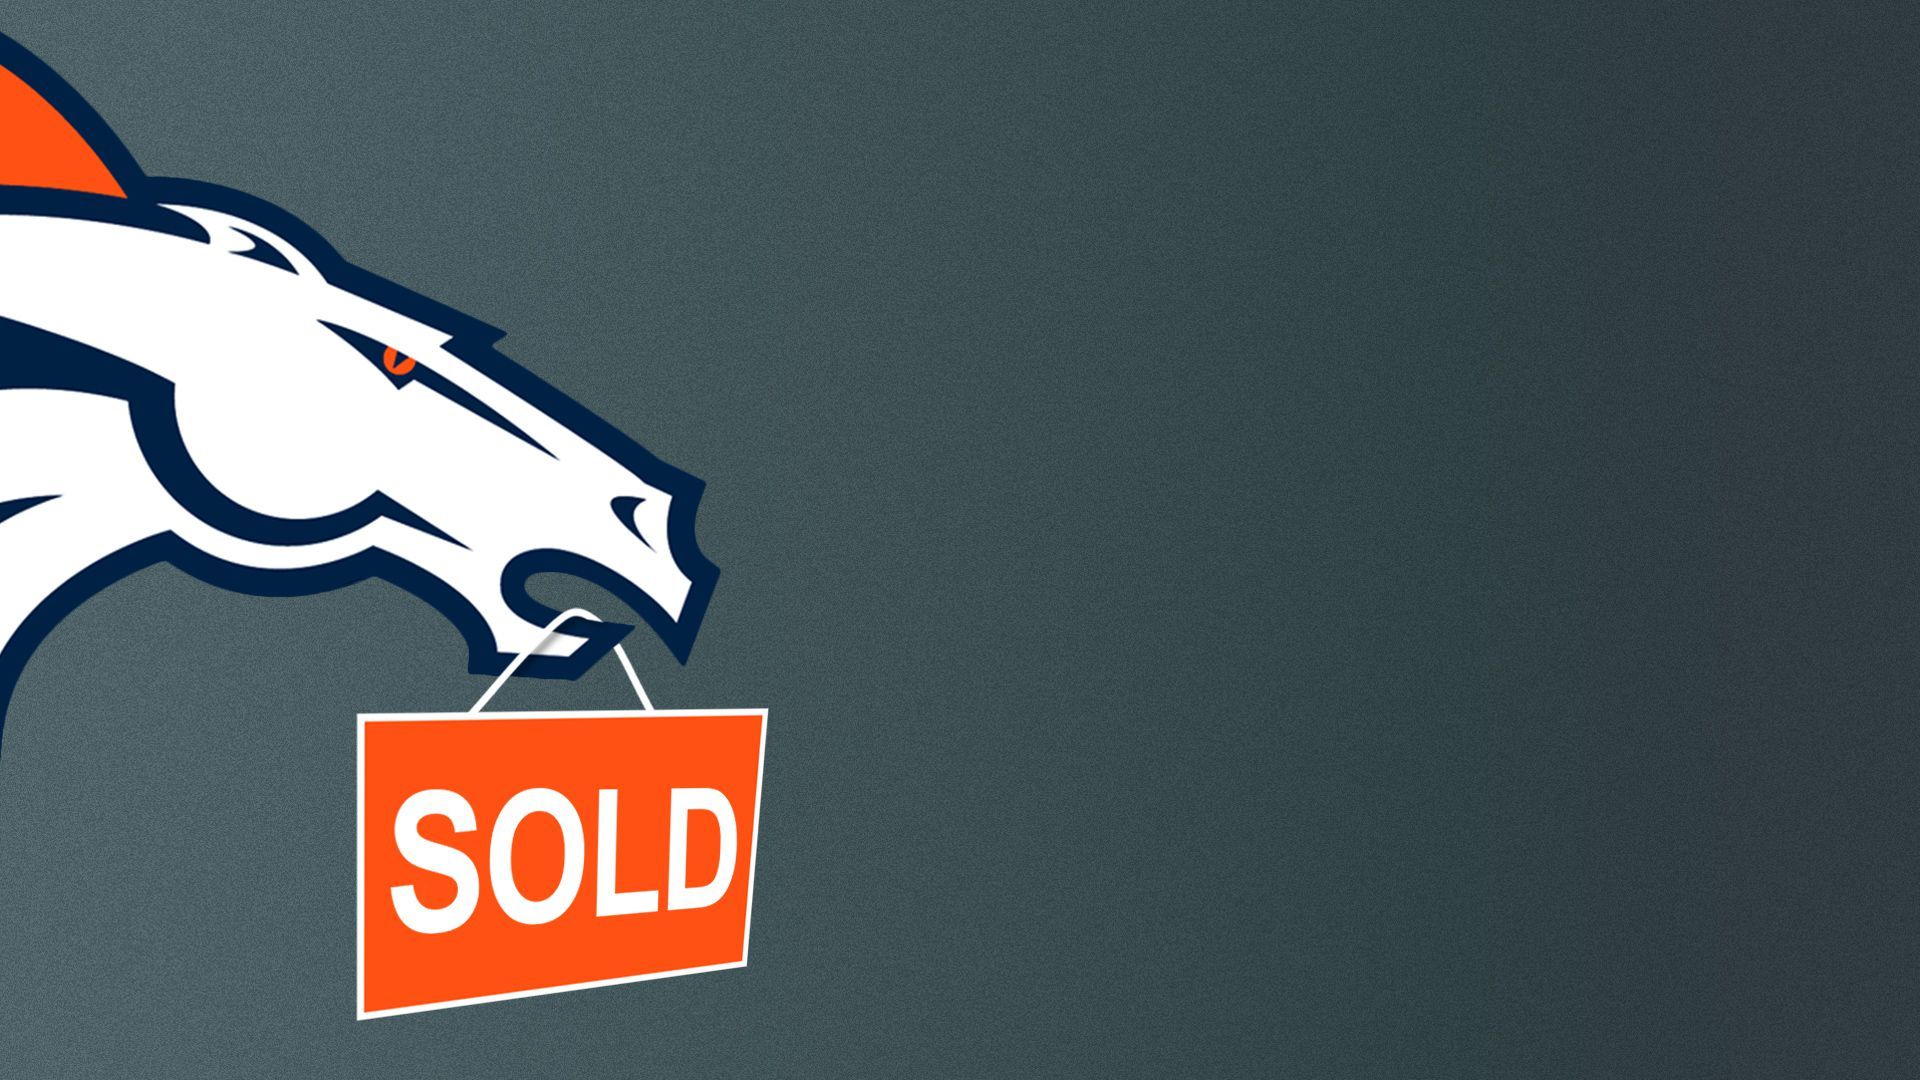 Illustration of the Denver Broncos logo holding a “Sold” sign in its mouth.